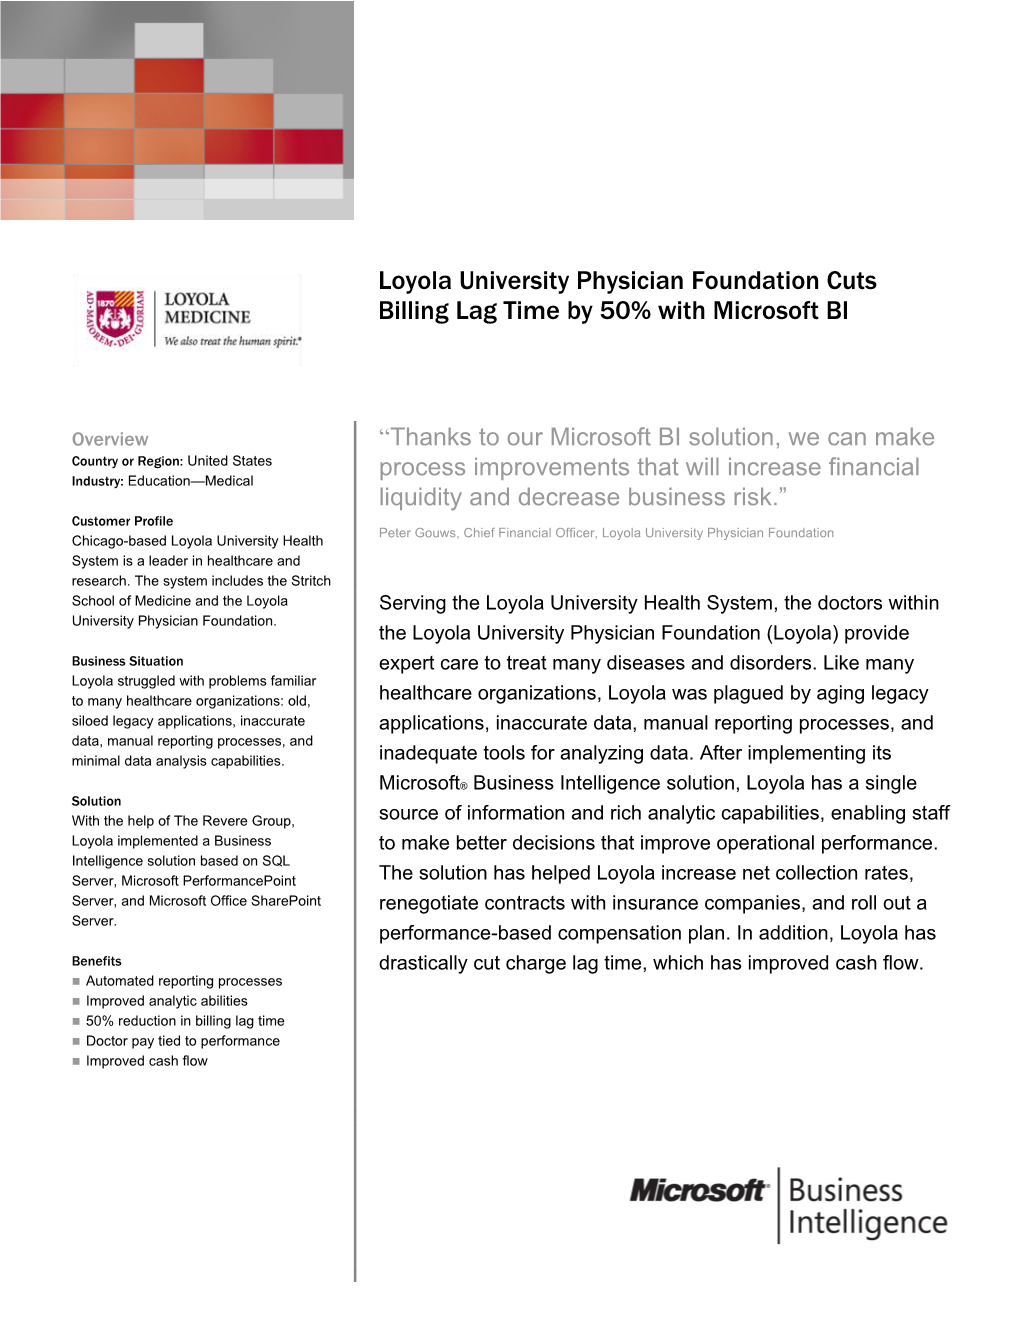 Loyola University Physician Foundation Cuts Billing Lag Time by 50% with Microsoft BI